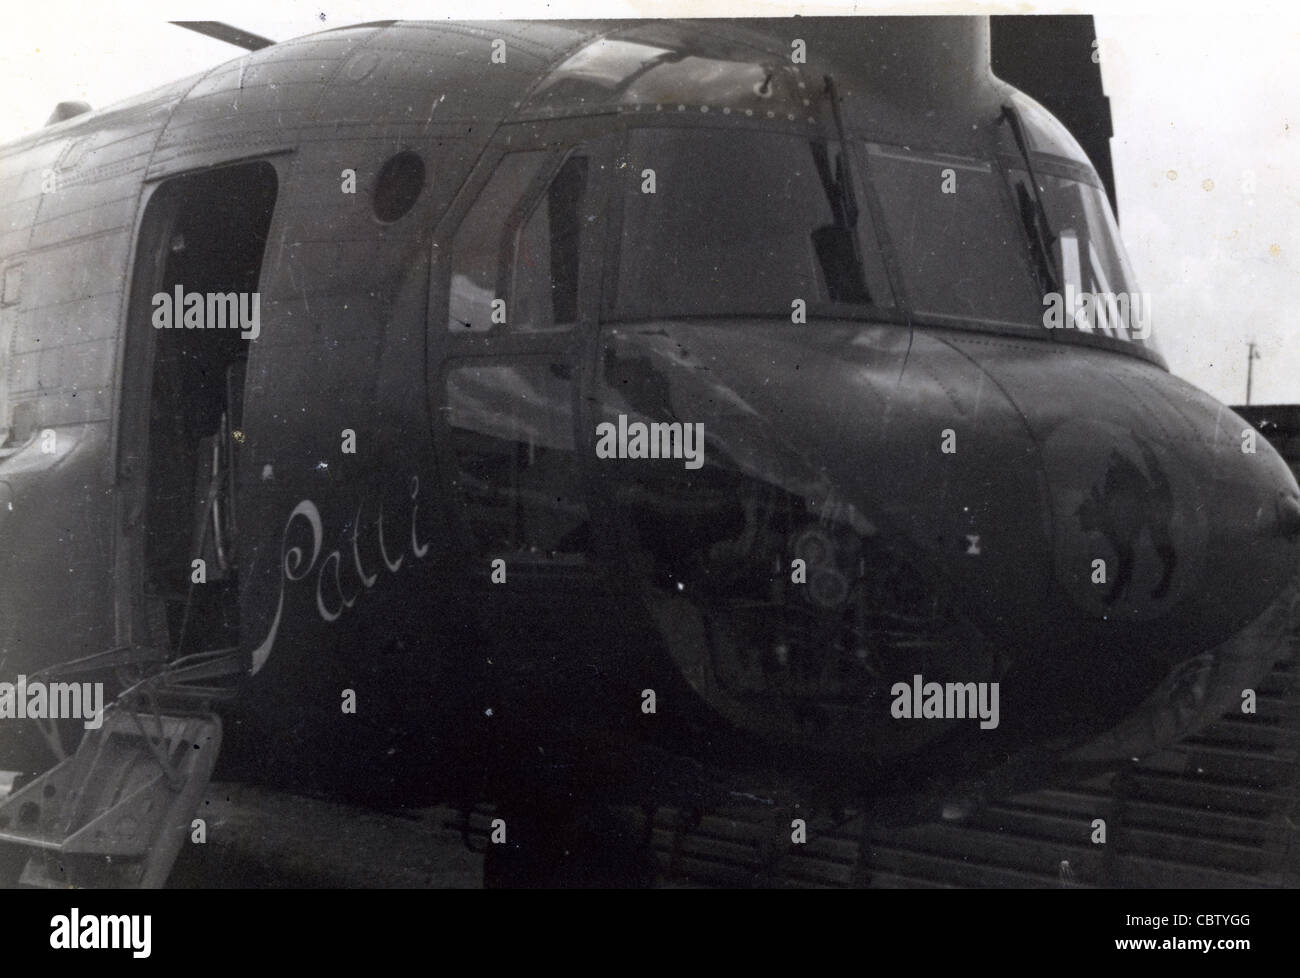 closeup of helicopter nose art 213th Aviation Company (Assault Support Helicopter) Black Cats which was a Chinook Unit. Stock Photo